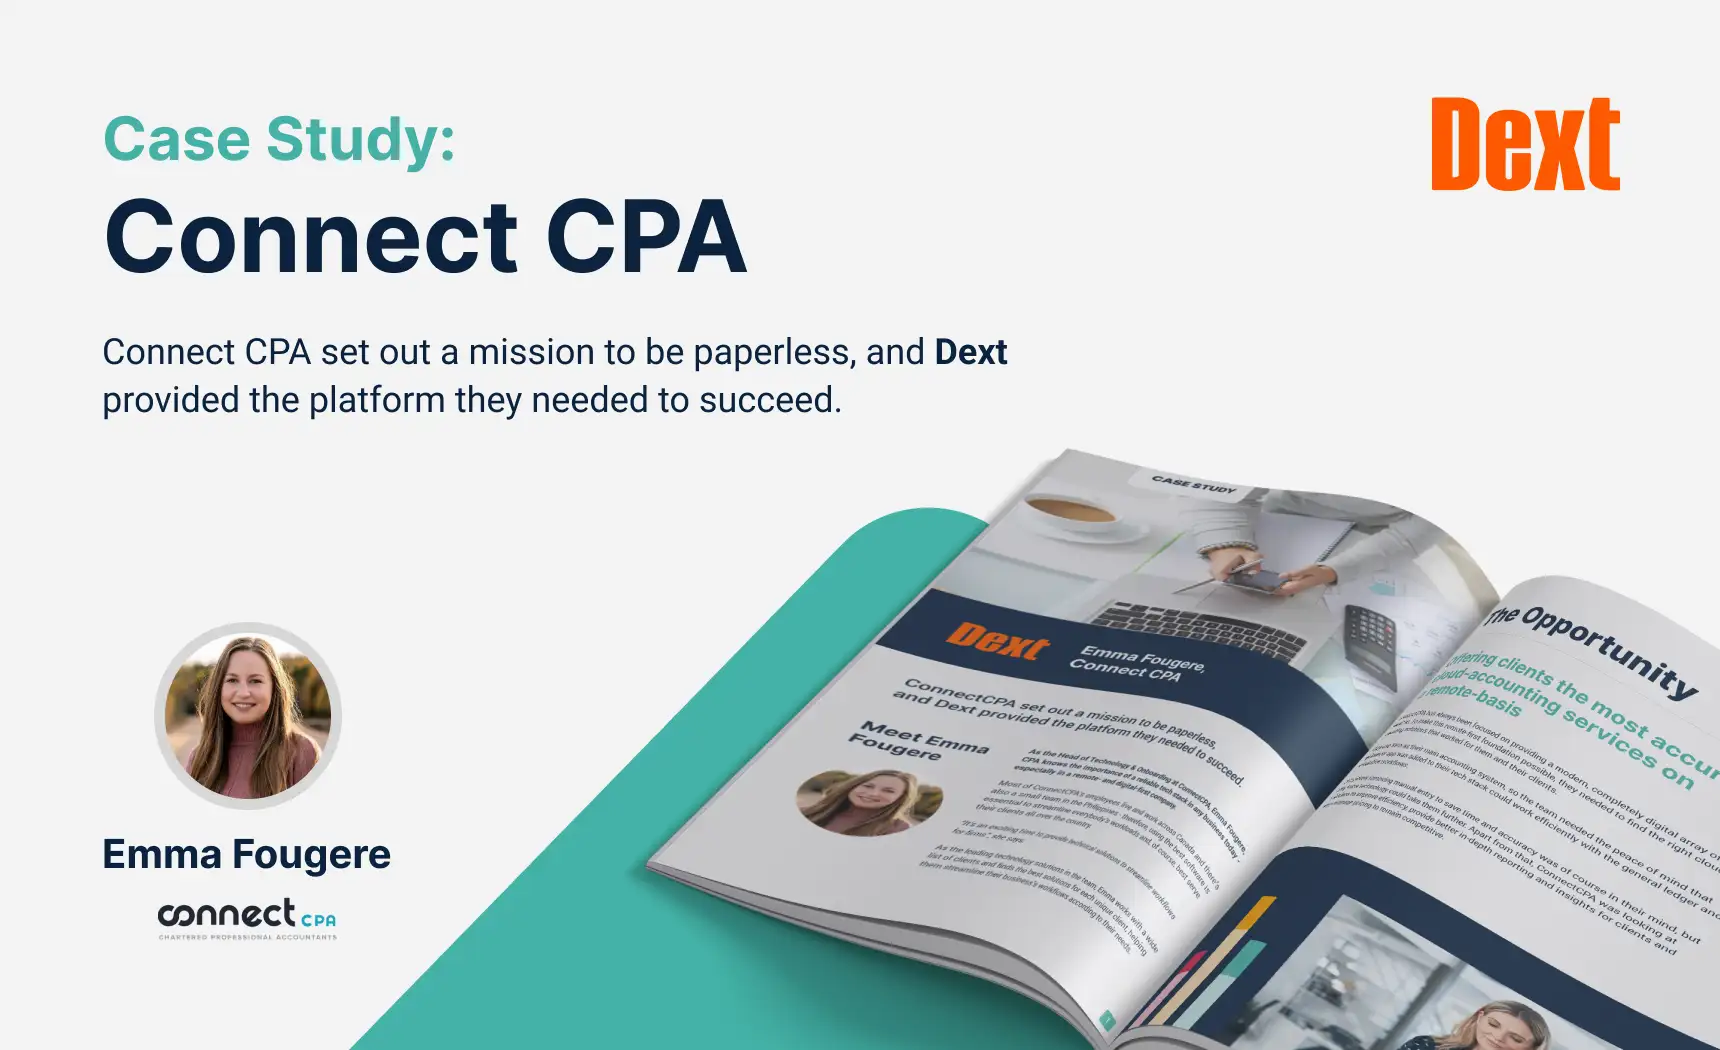 Case Study: Emma Fougere, ConnectCPA image